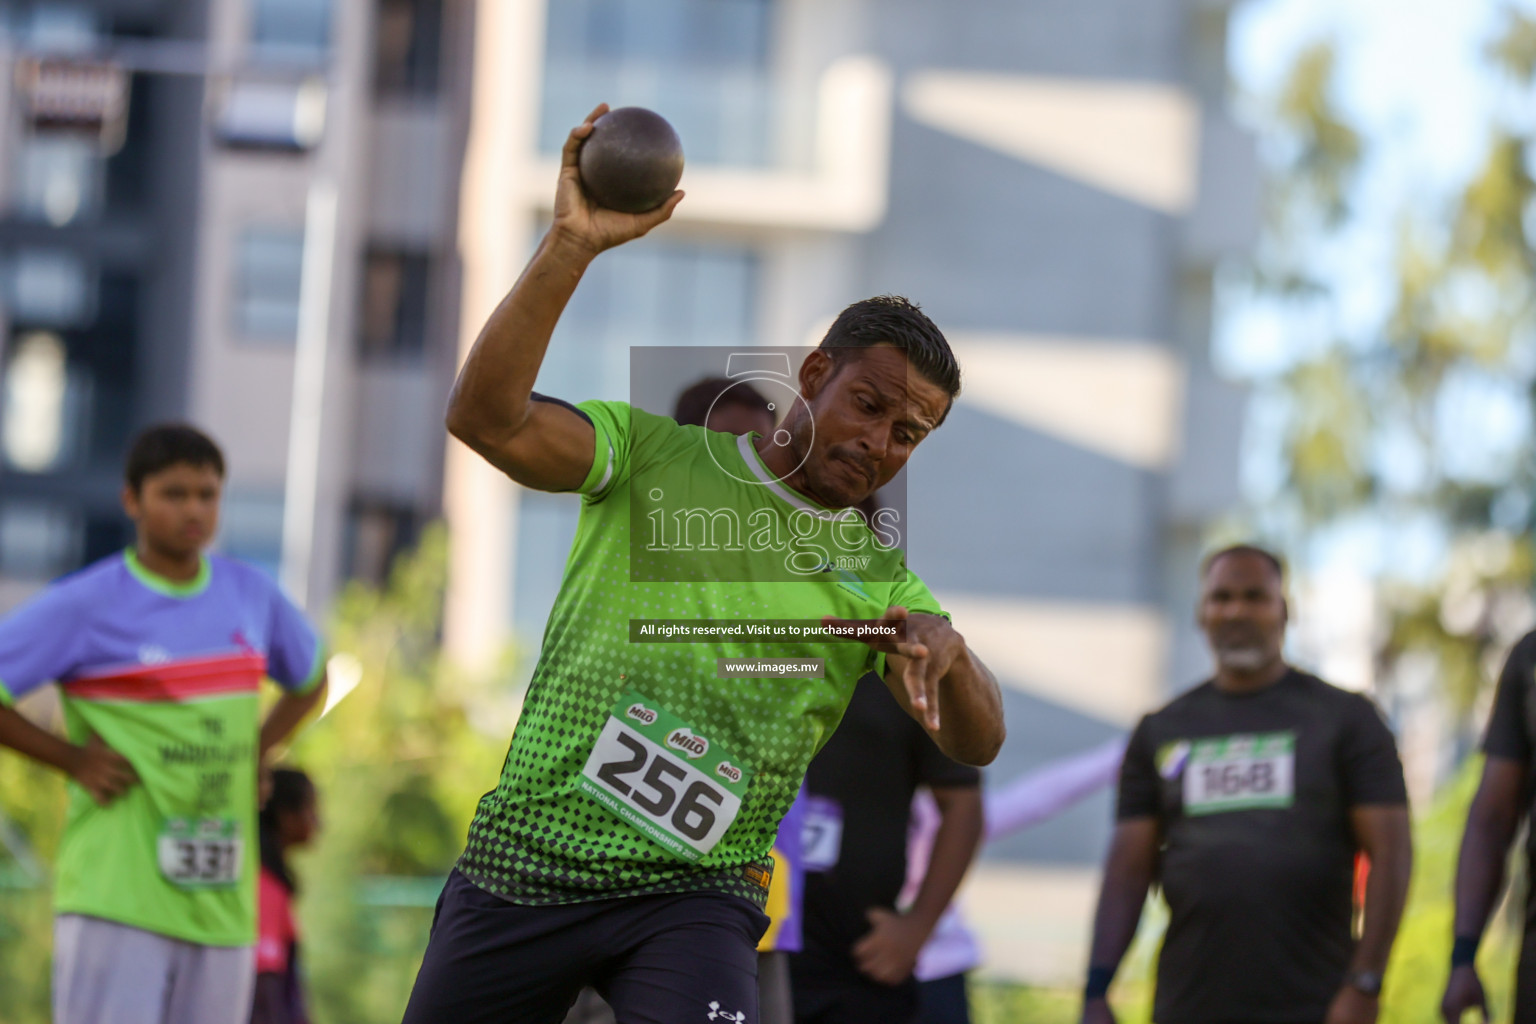 Day 2 of Athletics National Championships 2022 on 23rd Sep 2022, held in Hulhumale', Maldives Photos: Hassan Simah / Images.mv